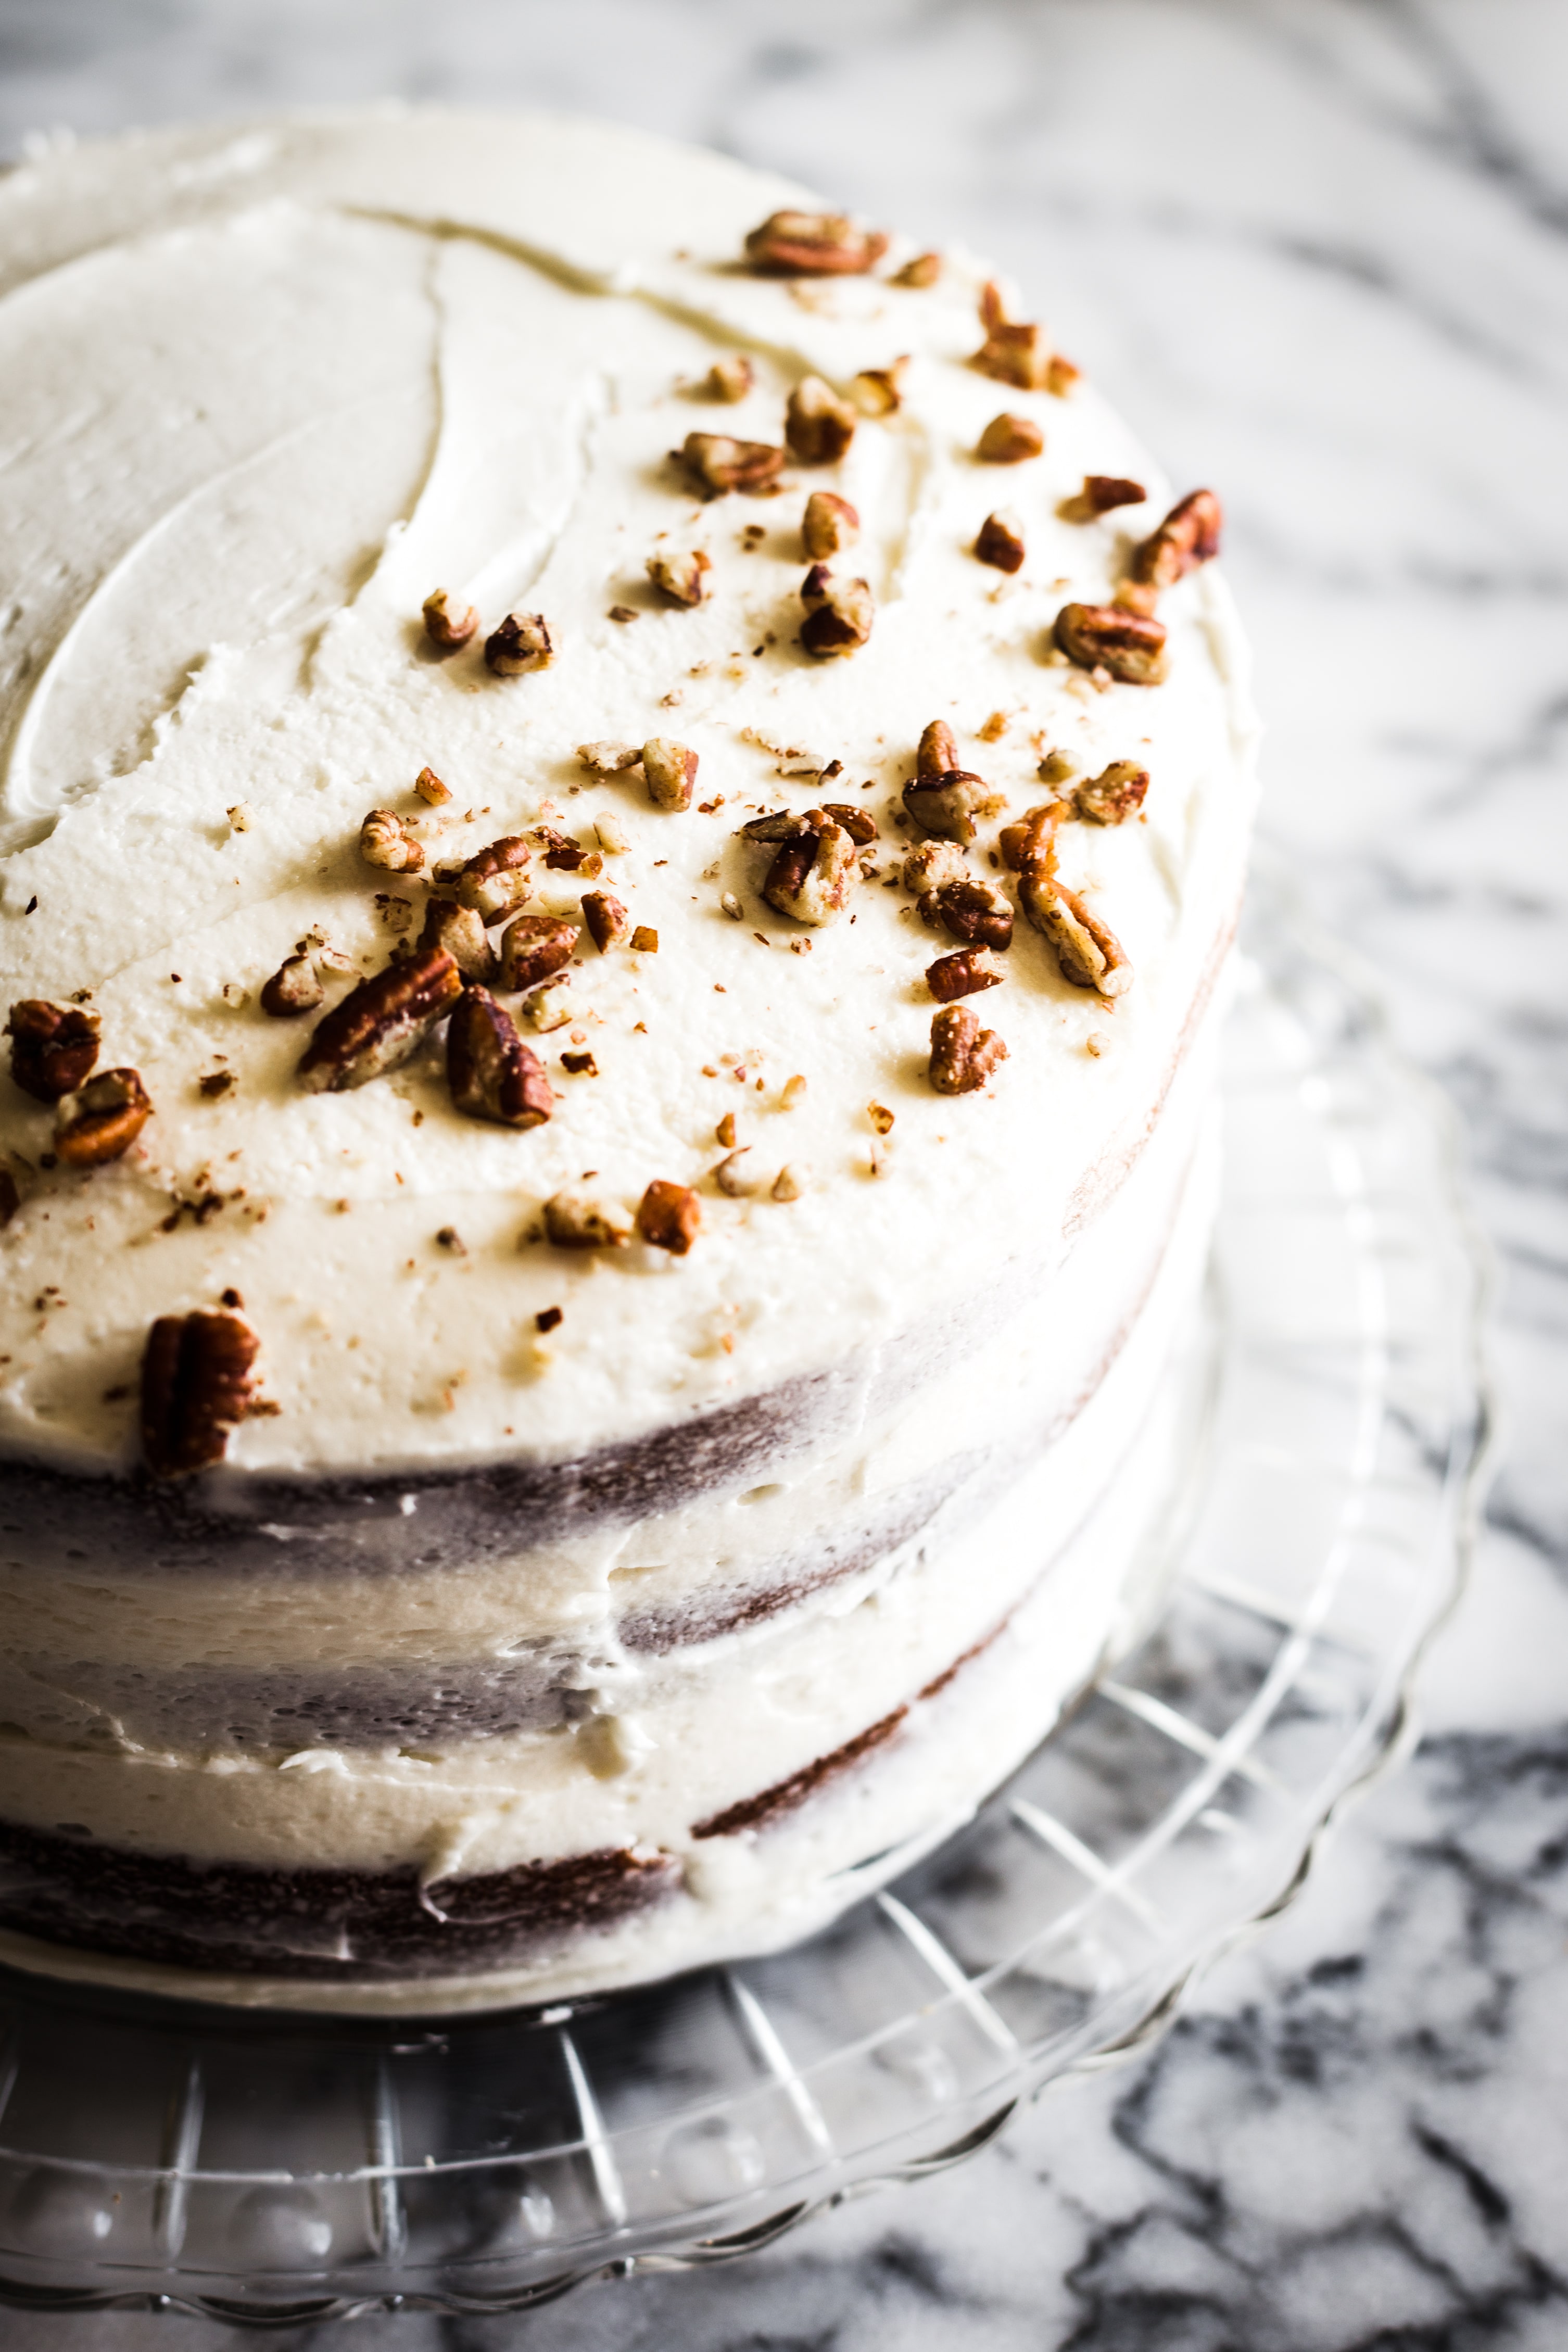 Similar in taste to carrot cake or spice cake, this Hummingbird Cake combines traditional and tropical flavors like banana and pineapple and is topped off with a classic buttercream frosting. 